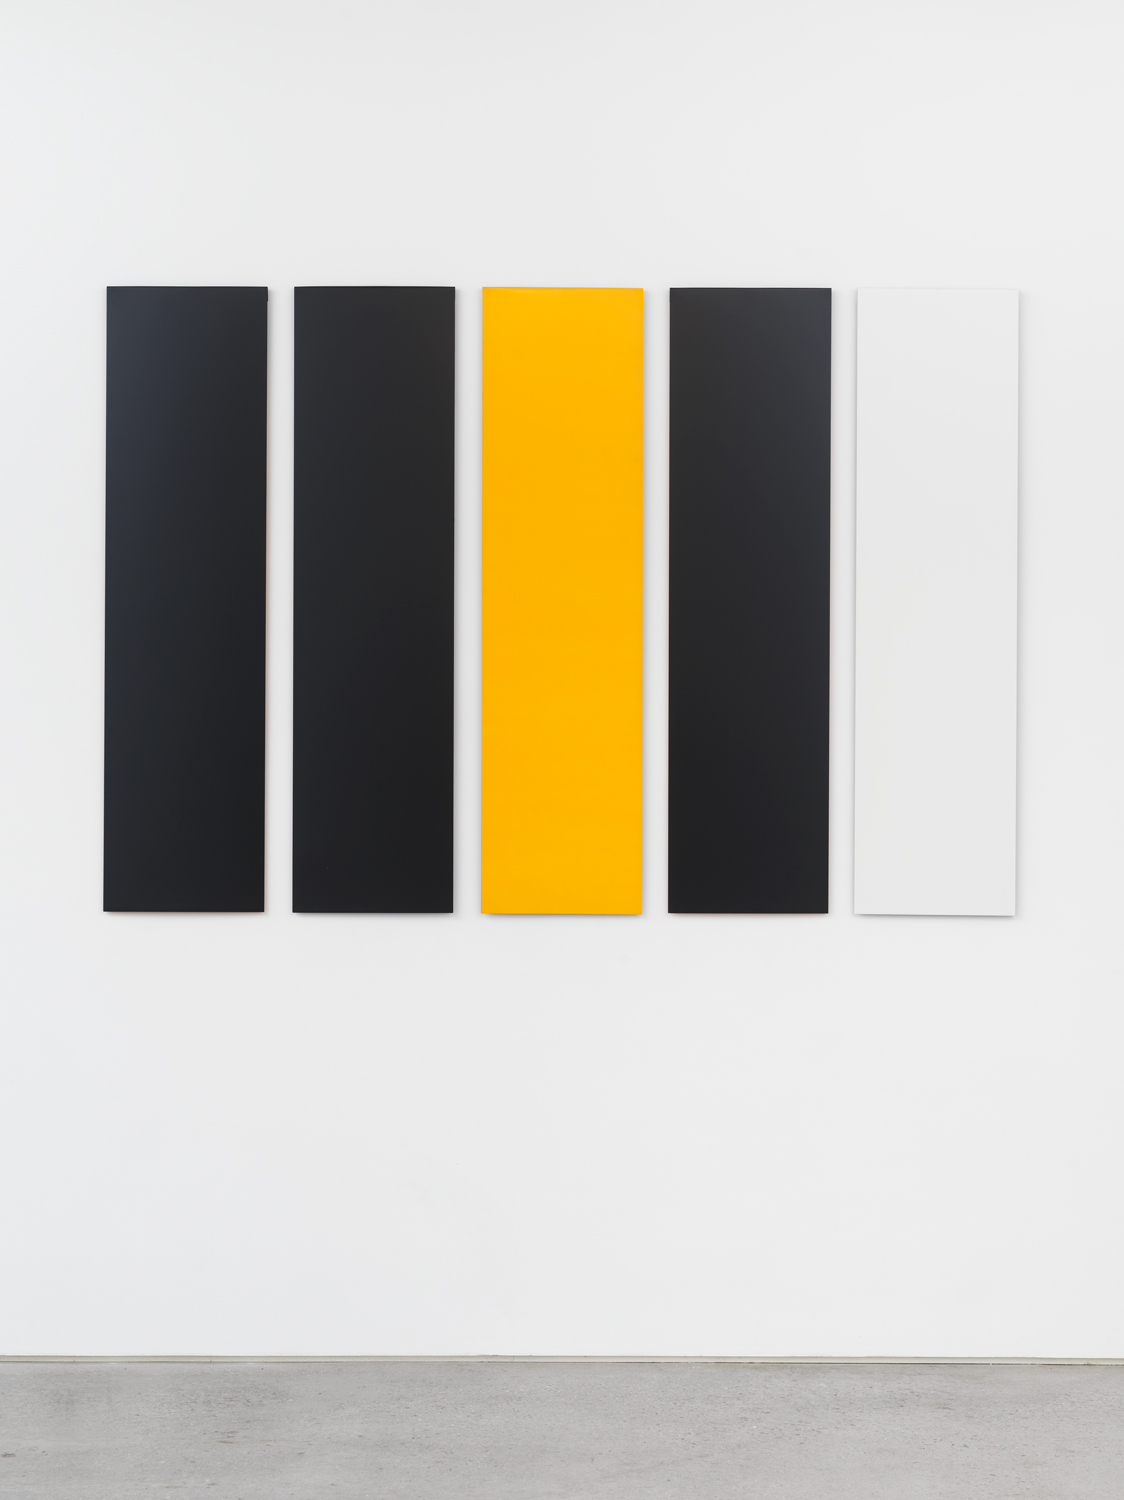 Untitled (Aluminum Module), 1974-2019, acrylic lacquer on aluminum, each module 46.75 x 12 in; overall 46.75 x 68 in.